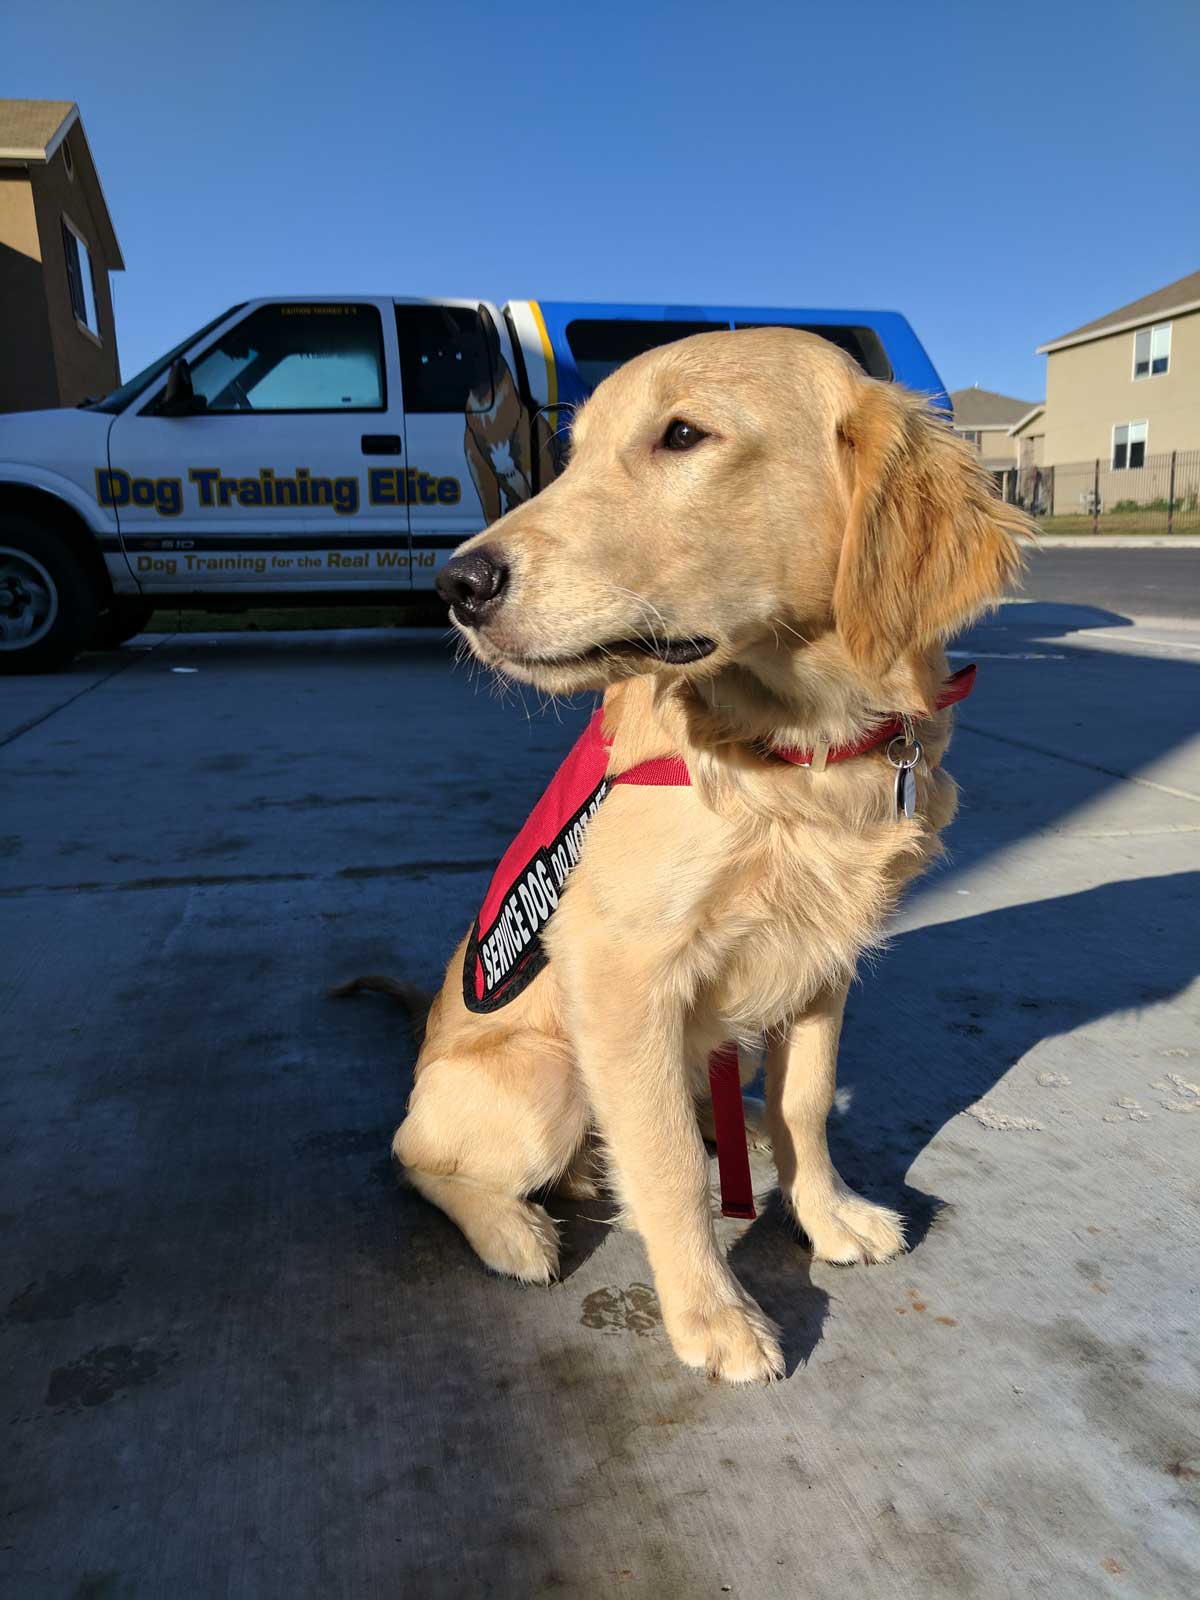 Dog Training Elite New Braunfels is proud to have the highest rated service dog training programs near you in New Braunfels.